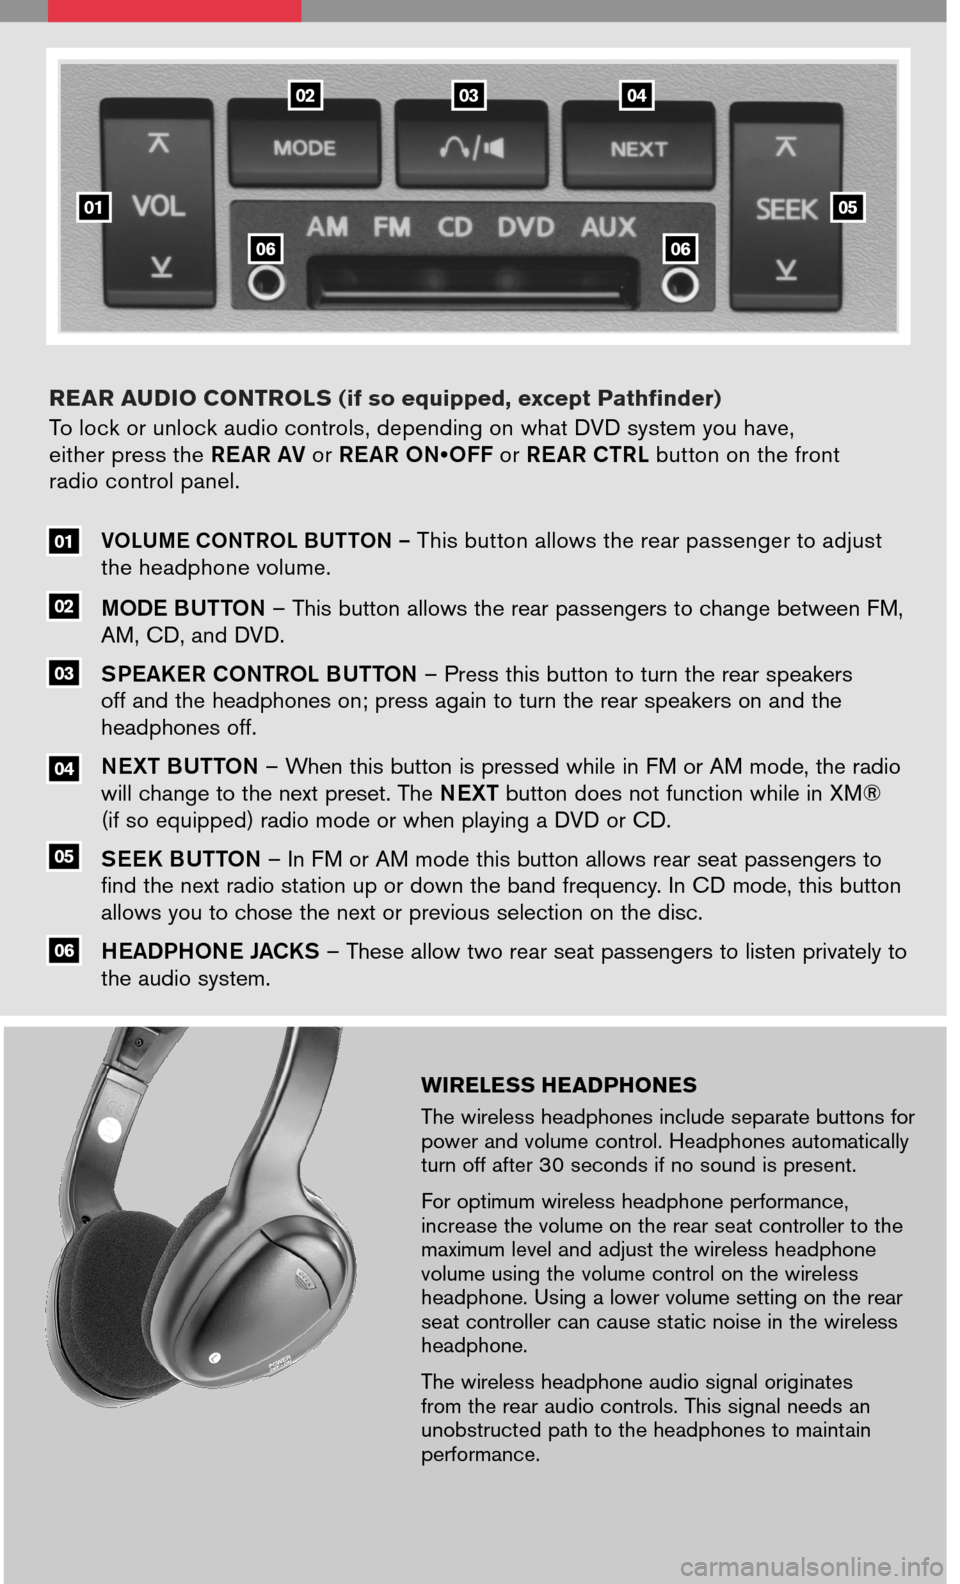 NISSAN ARMADA 2008 1.G Entertainment Syst 
WIRELESS HEADPHONES
The wireless headphones include separate buttons for power and volume control. Headphones automatically turn off after 30 seconds if no sound is present.
For optimum wireless head